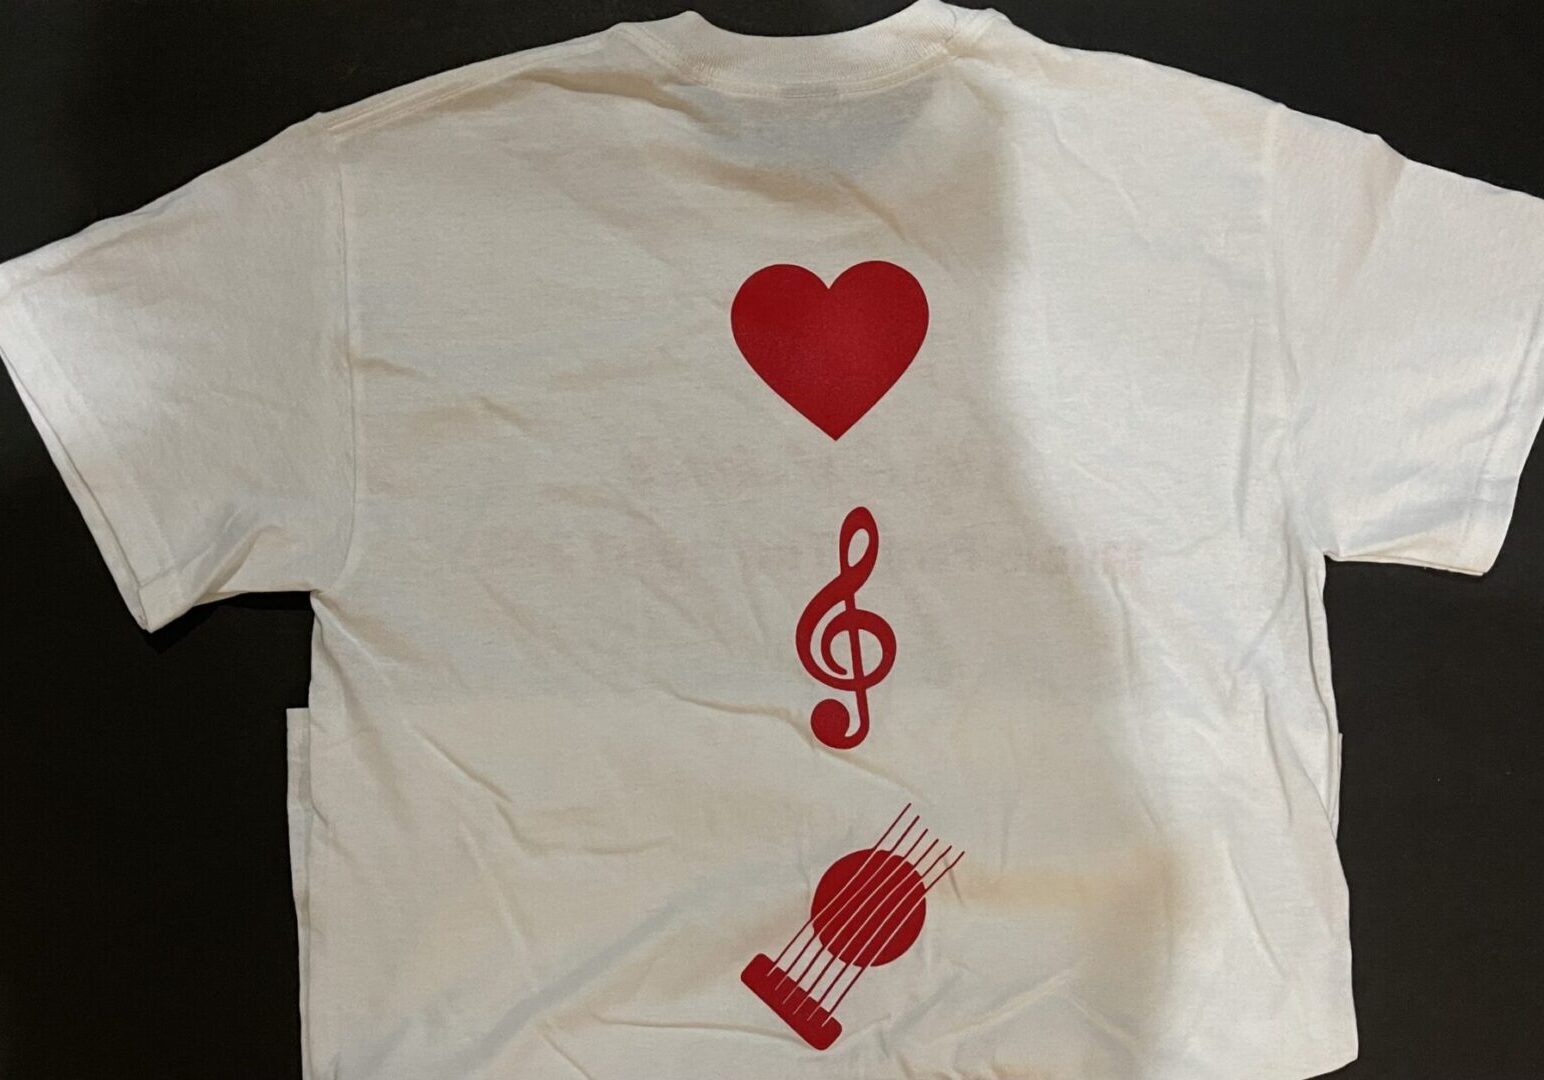 A white t-shirt with red designs on it.